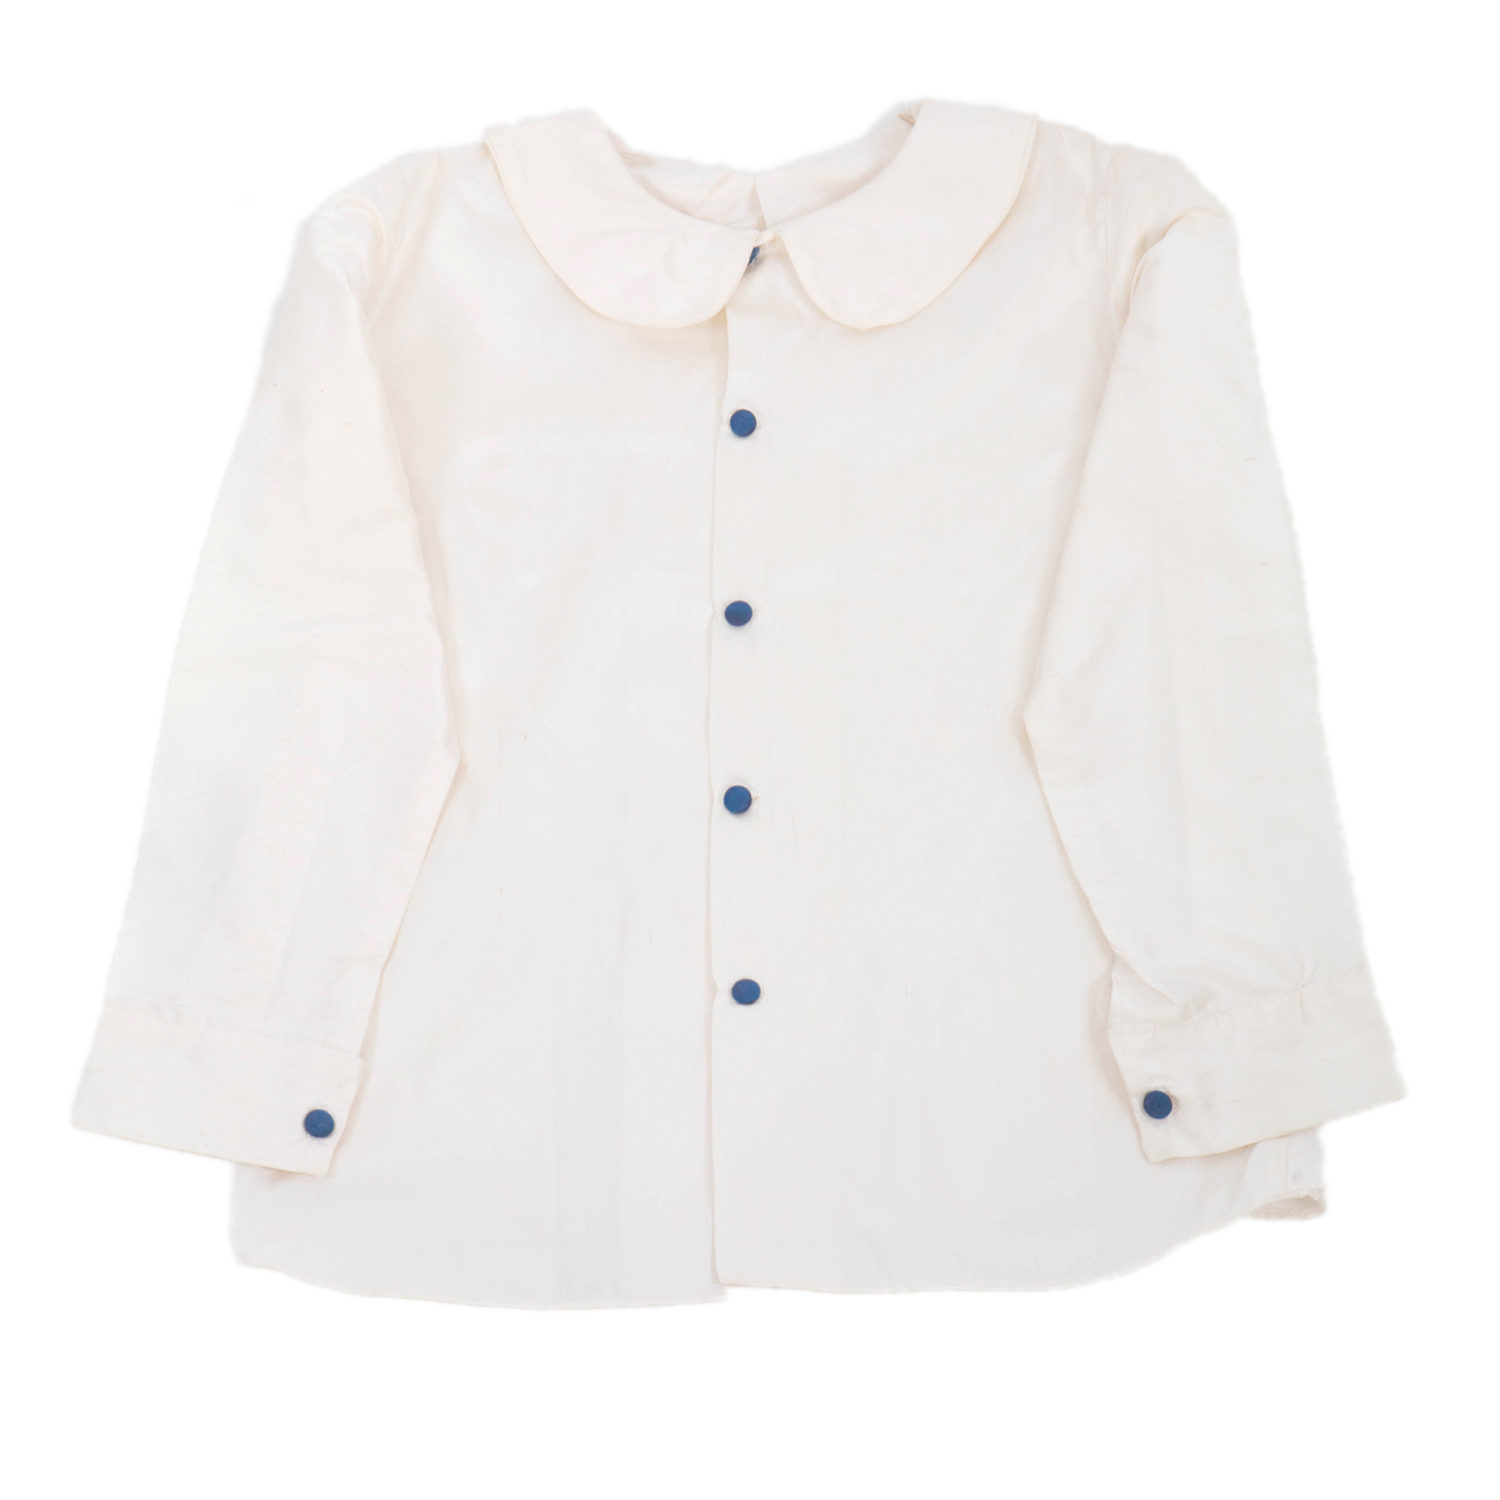 An ivory silk pageboy shirt with peterpan collar and covered blue buttons - The Little Wedding Company